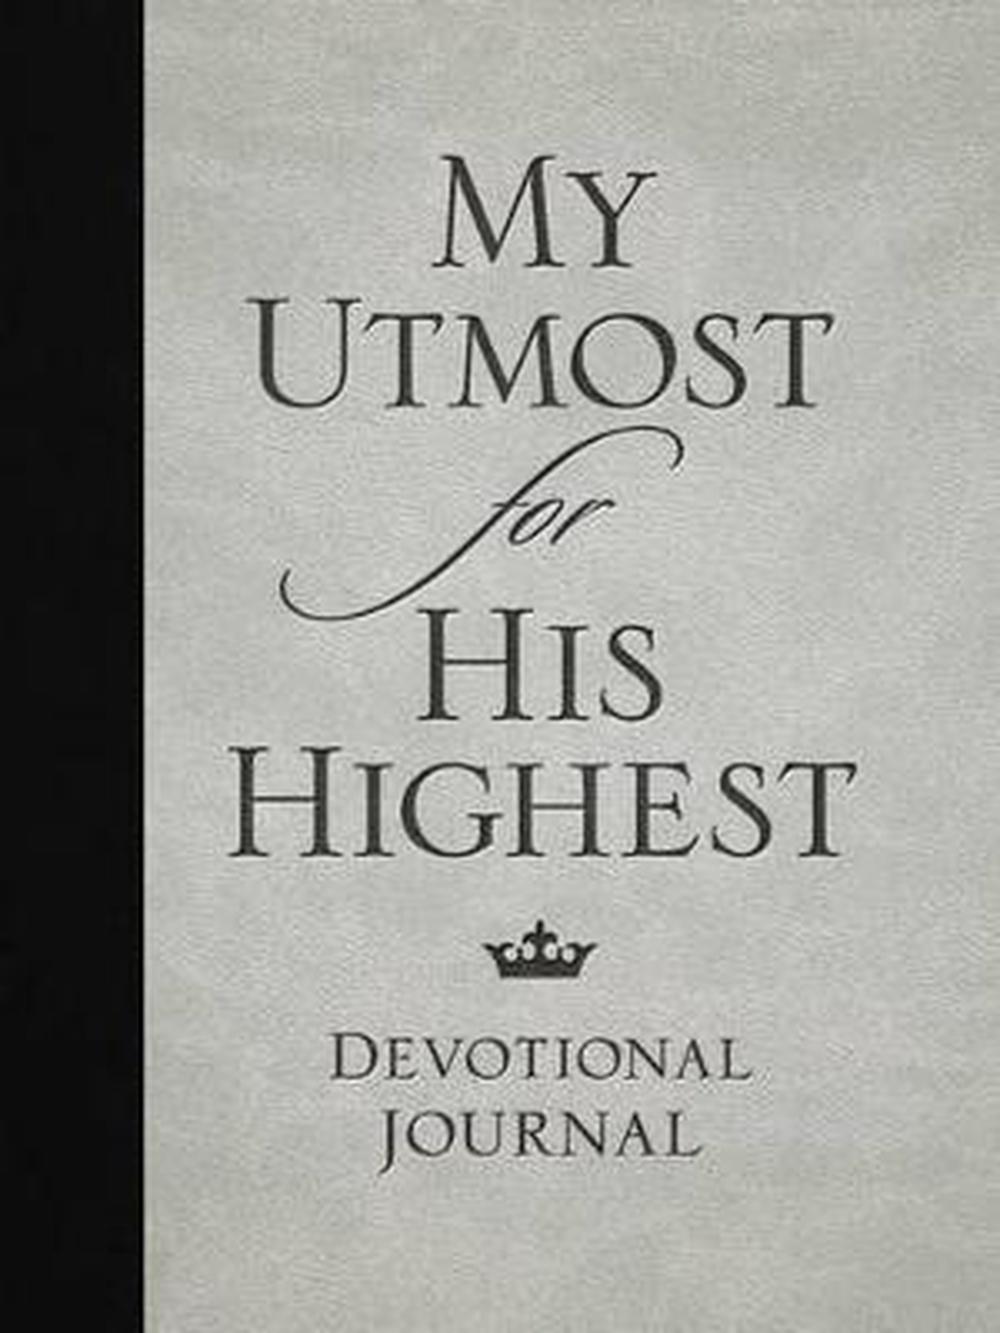 utmost for his highest